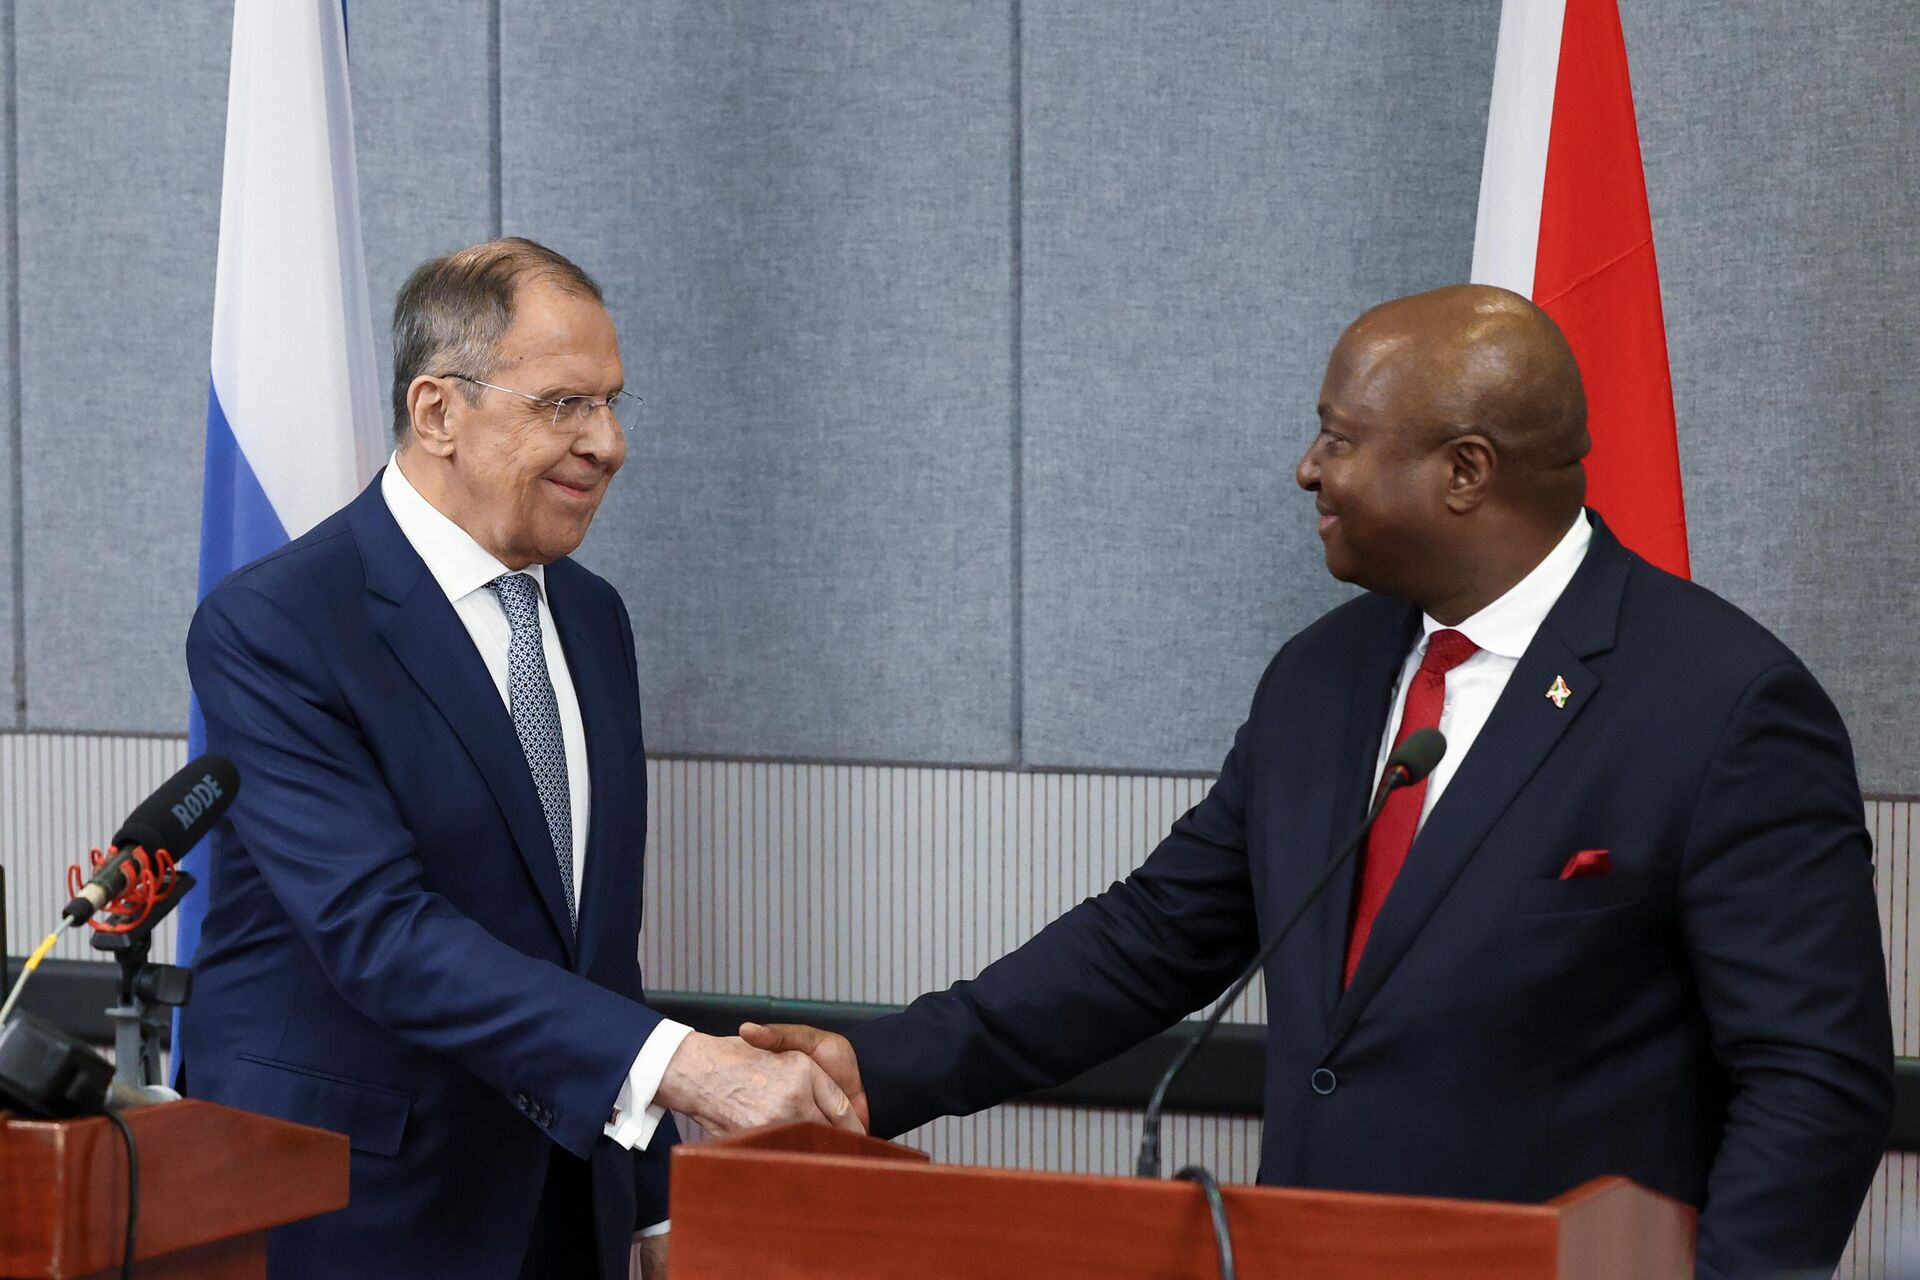 In this handout photo released by the Russian Foreign Ministry, Russian Foreign Minister Sergey Lavrov and his Burundian counterpart Albert Shingiro shake hands during a news conference following their meeting in Bujumbura, Republic of Burundi. - Sputnik International, 1920, 03.06.2023